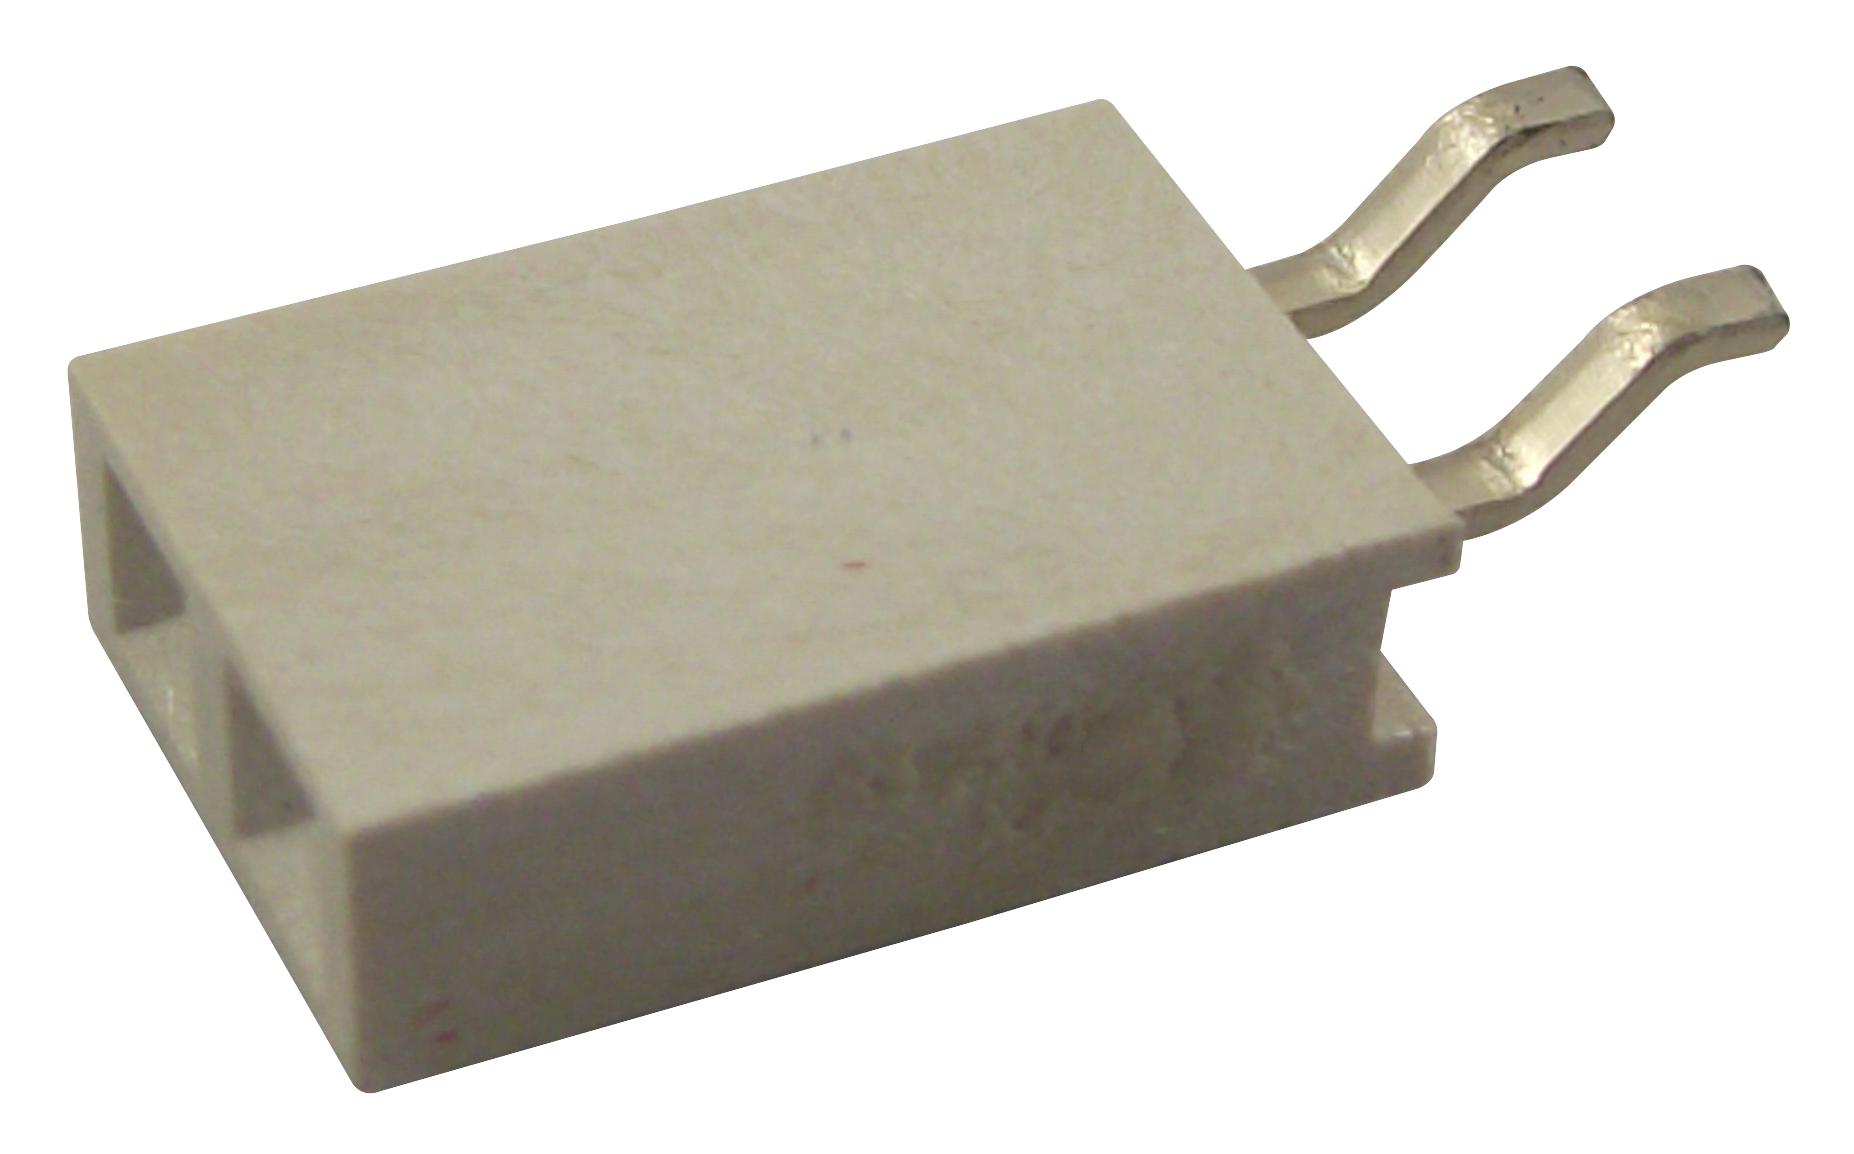 GCT (GLOBAL CONNECTOR TECHNOLOGY) Board-to-Board BG300-02-A-L-A RECEPTACLE, 2.54MM, SMT, R/A, 2WAY GCT (GLOBAL CONNECTOR TECHNOLOGY) 2084261 BG300-02-A-L-A